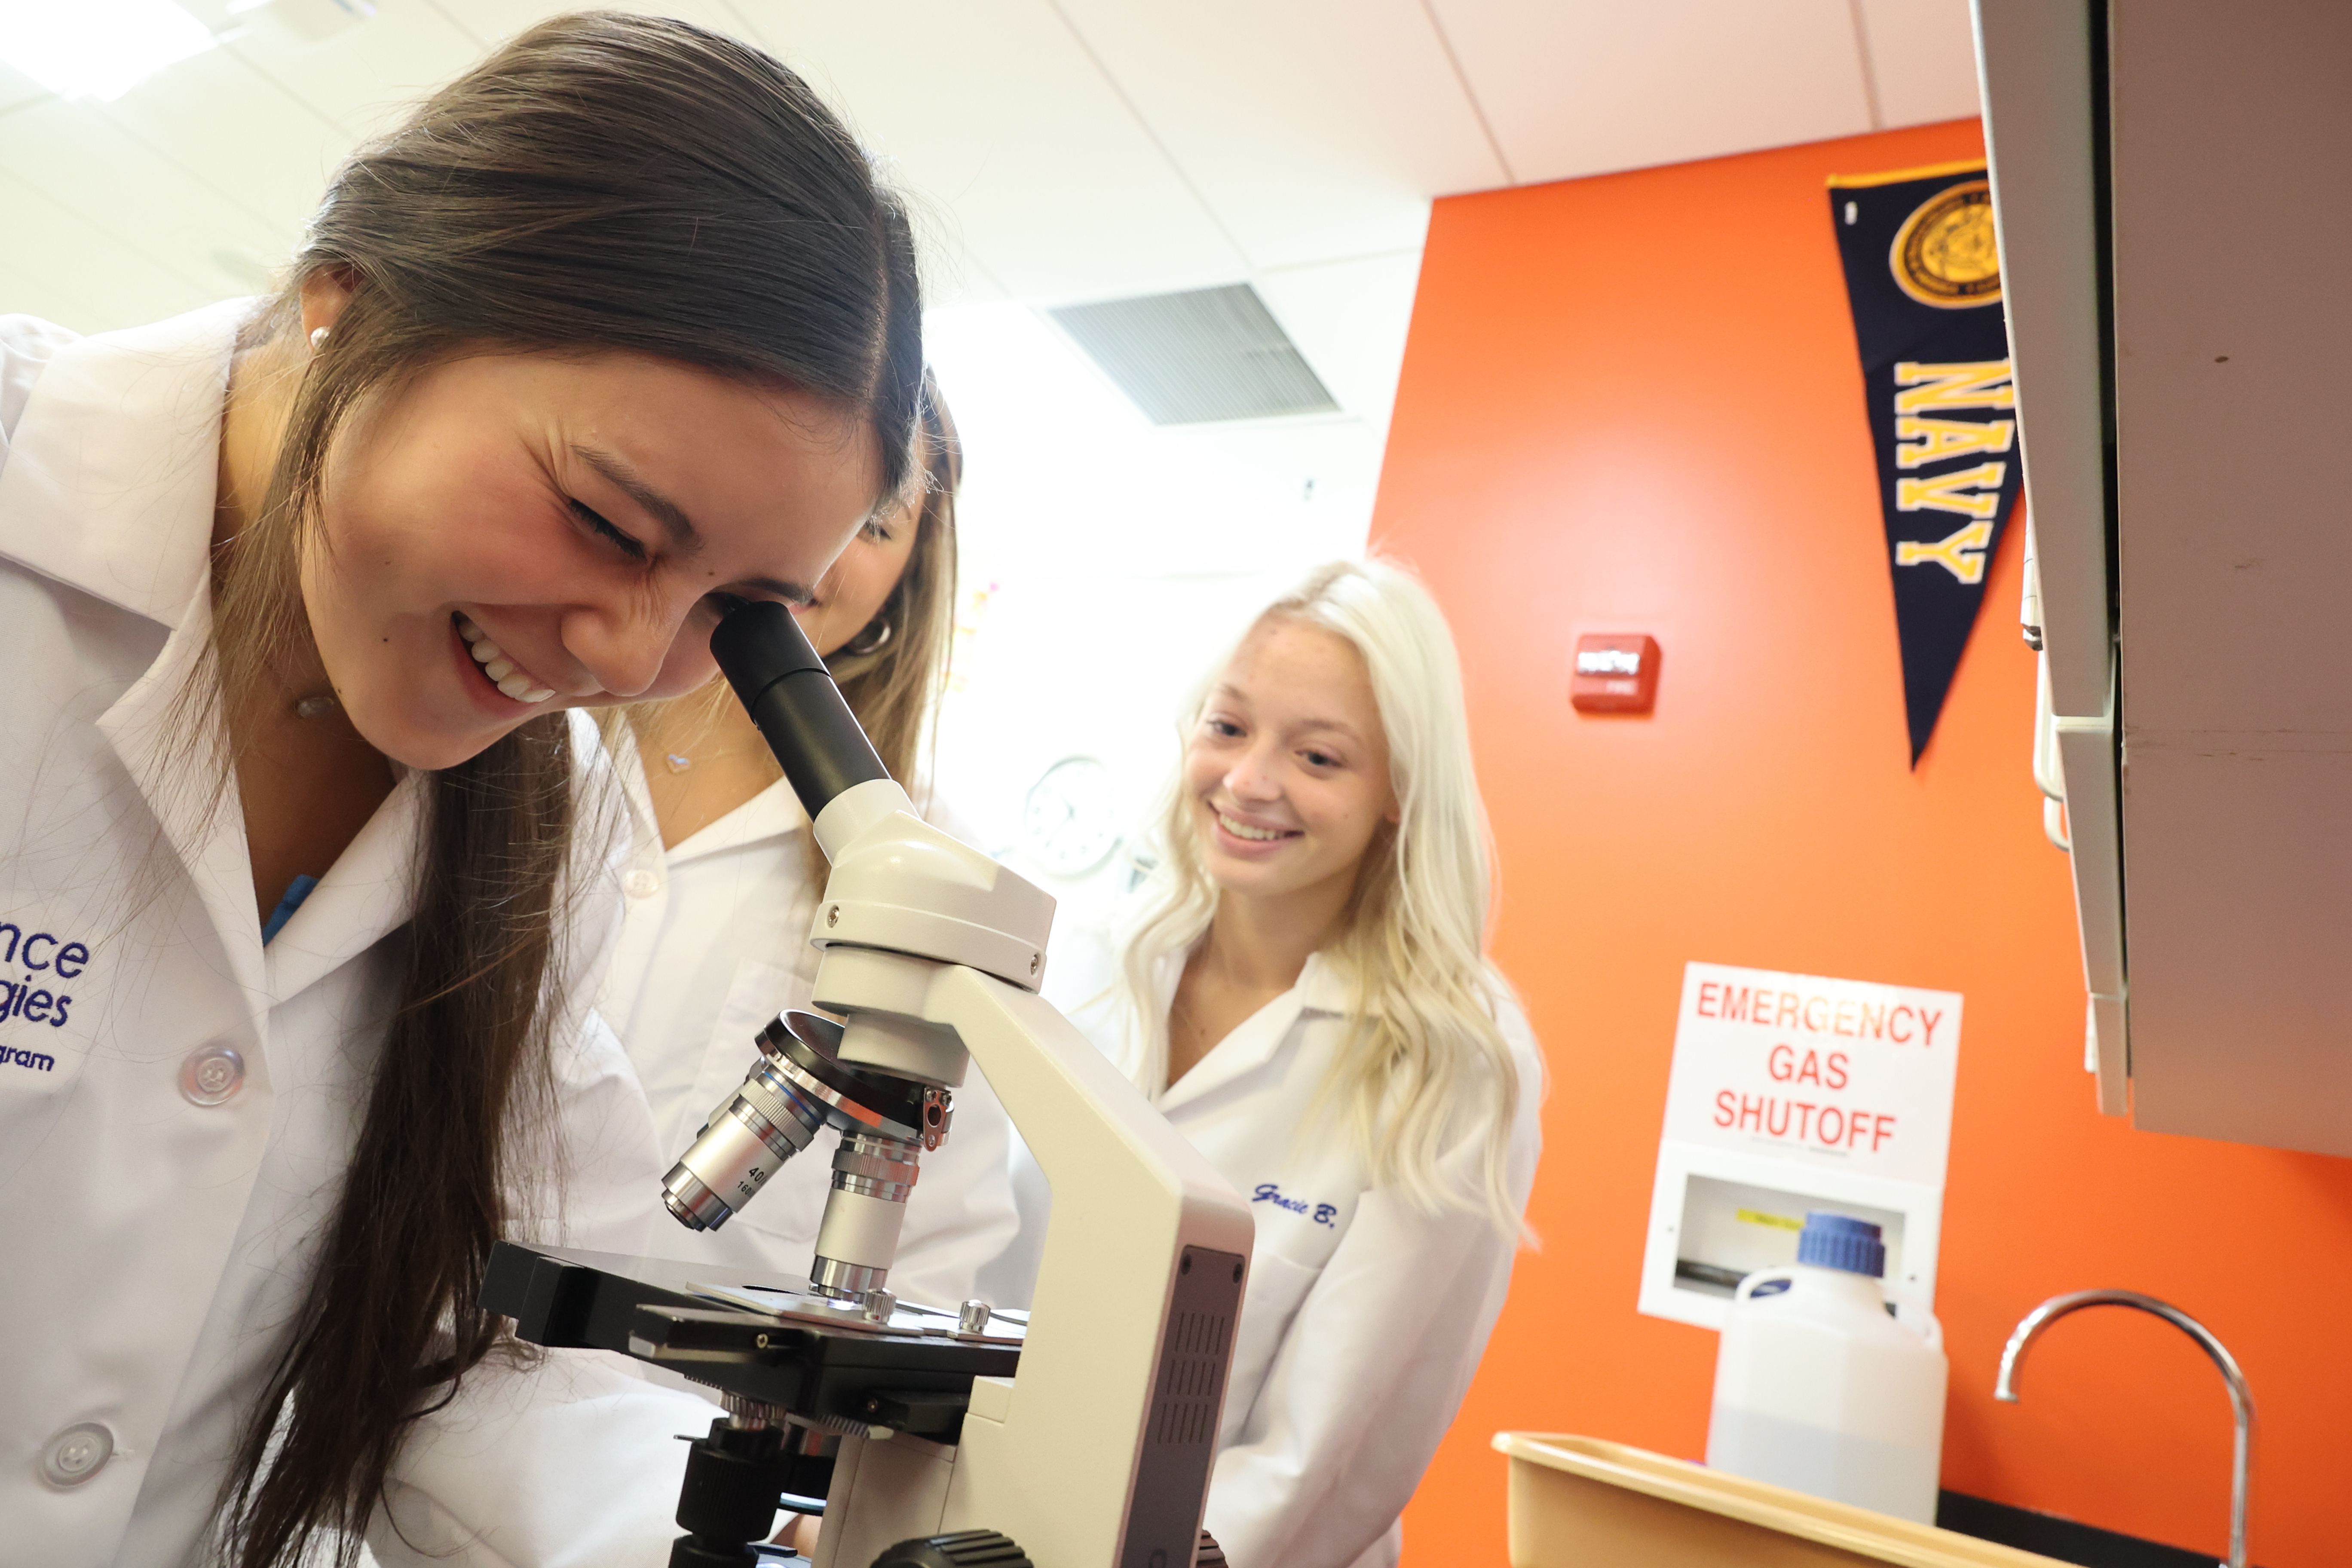 A group of female students gathers around a microscope, one peering down the eye piece.